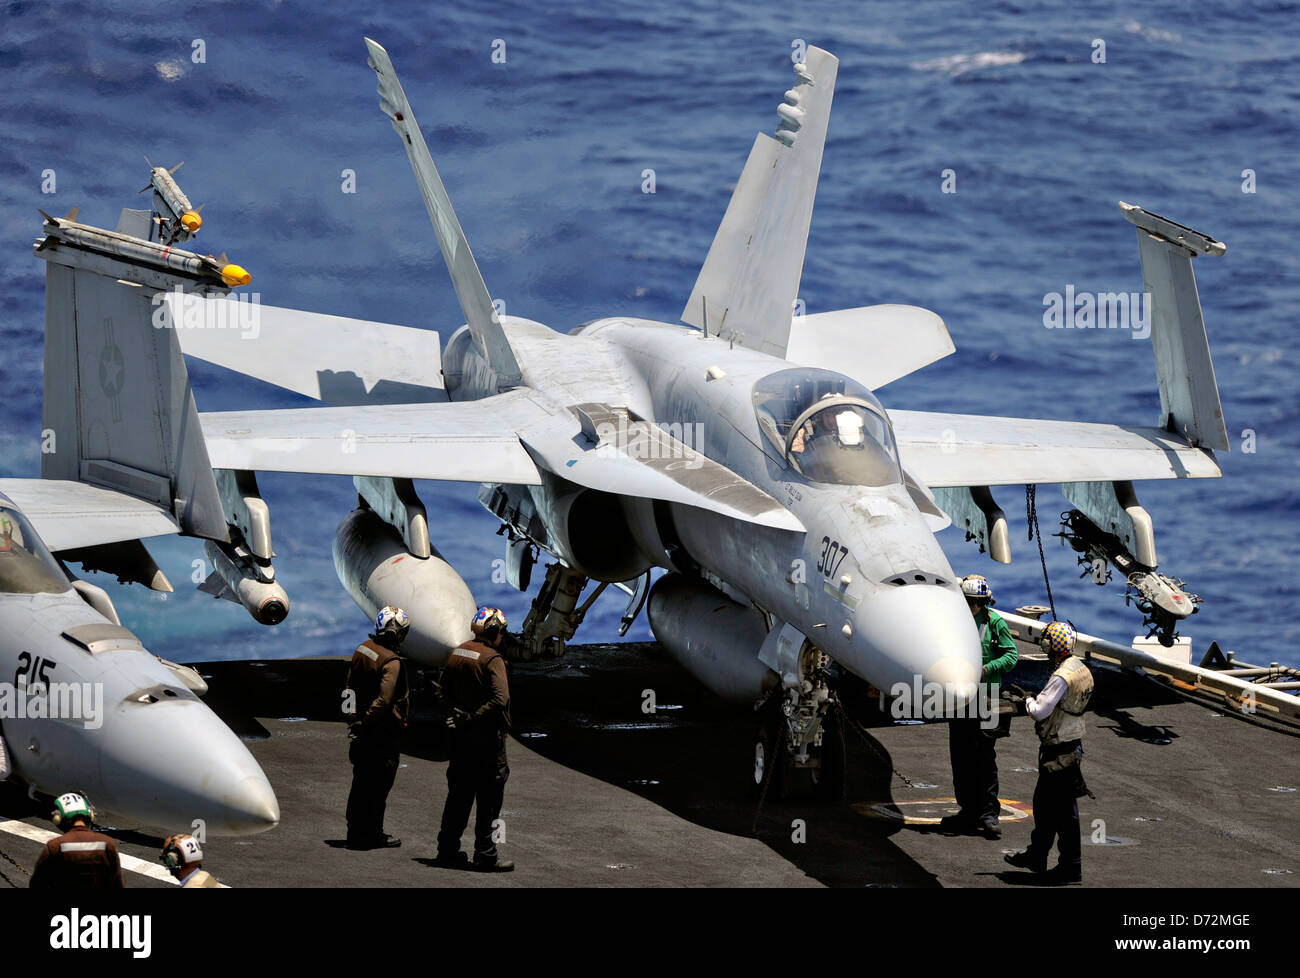 A US Navy F/A-18C Hornet fighter aircraft prepares to take off during flight operations on the aircraft carrier USS Nimitz April 25, 2013 in the Pacific Ocean. Stock Photo